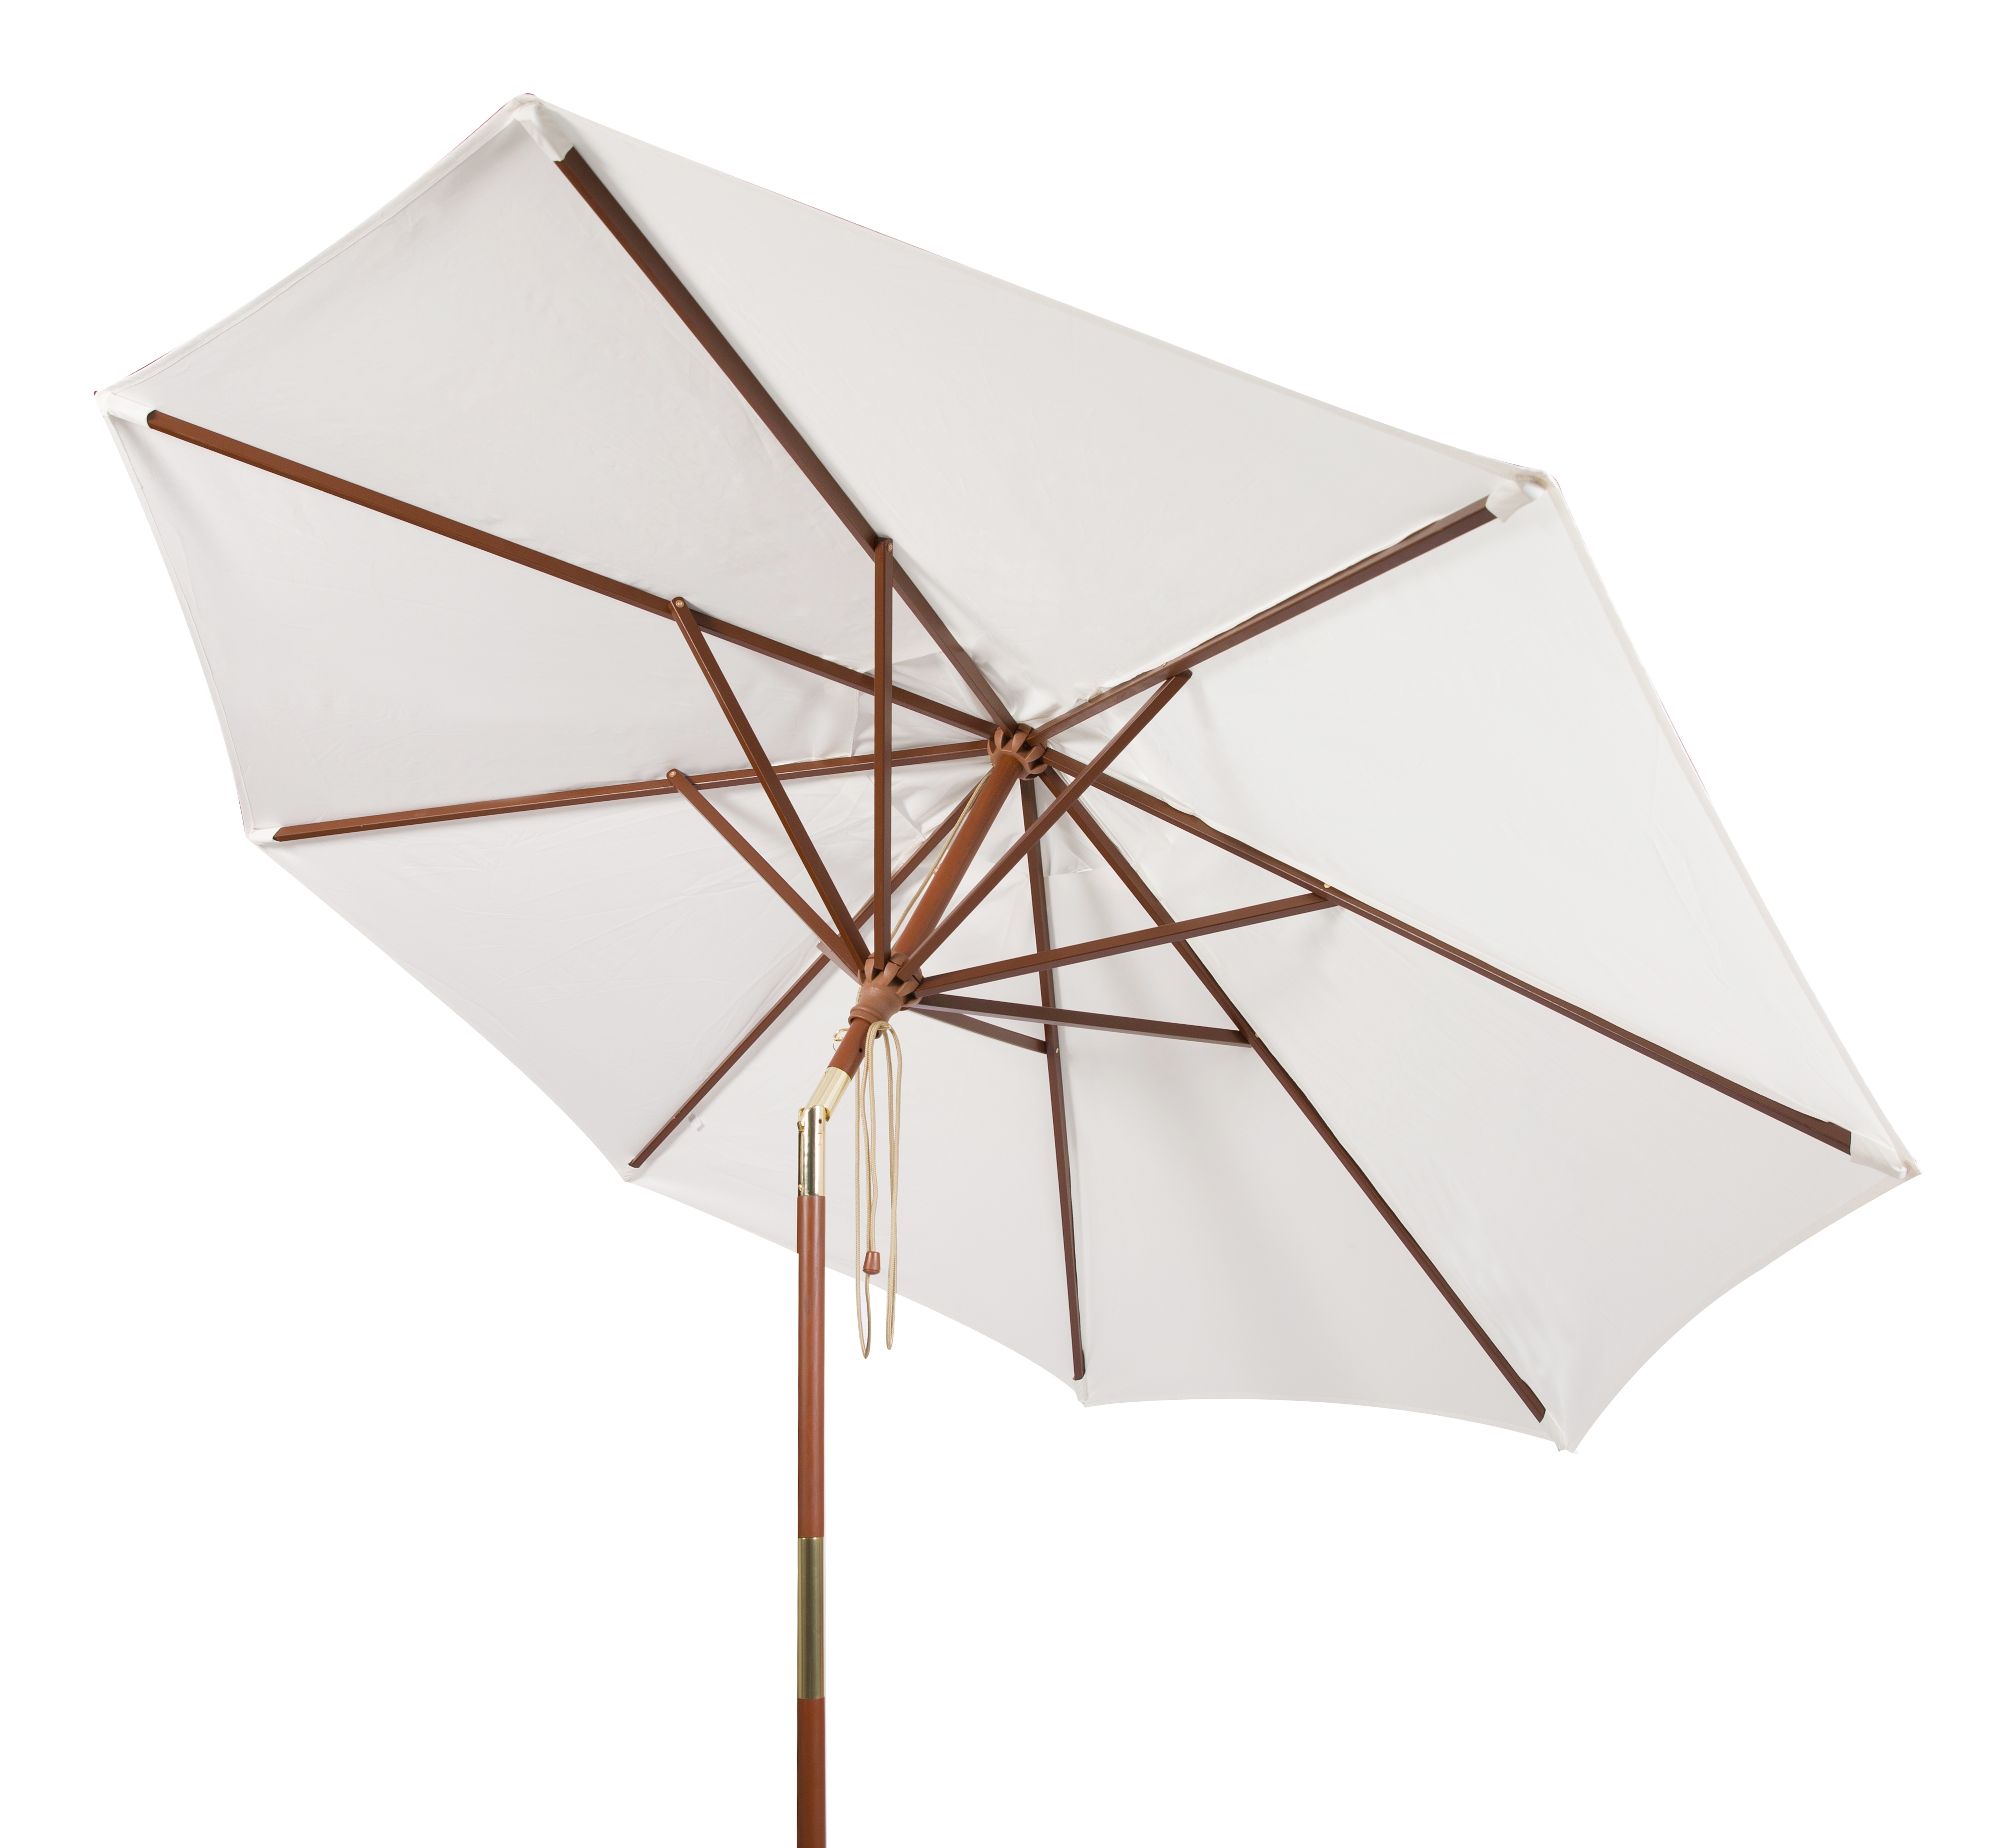 Cannes 9Ft Wooden Outdoor Umbrella, White - Image 1